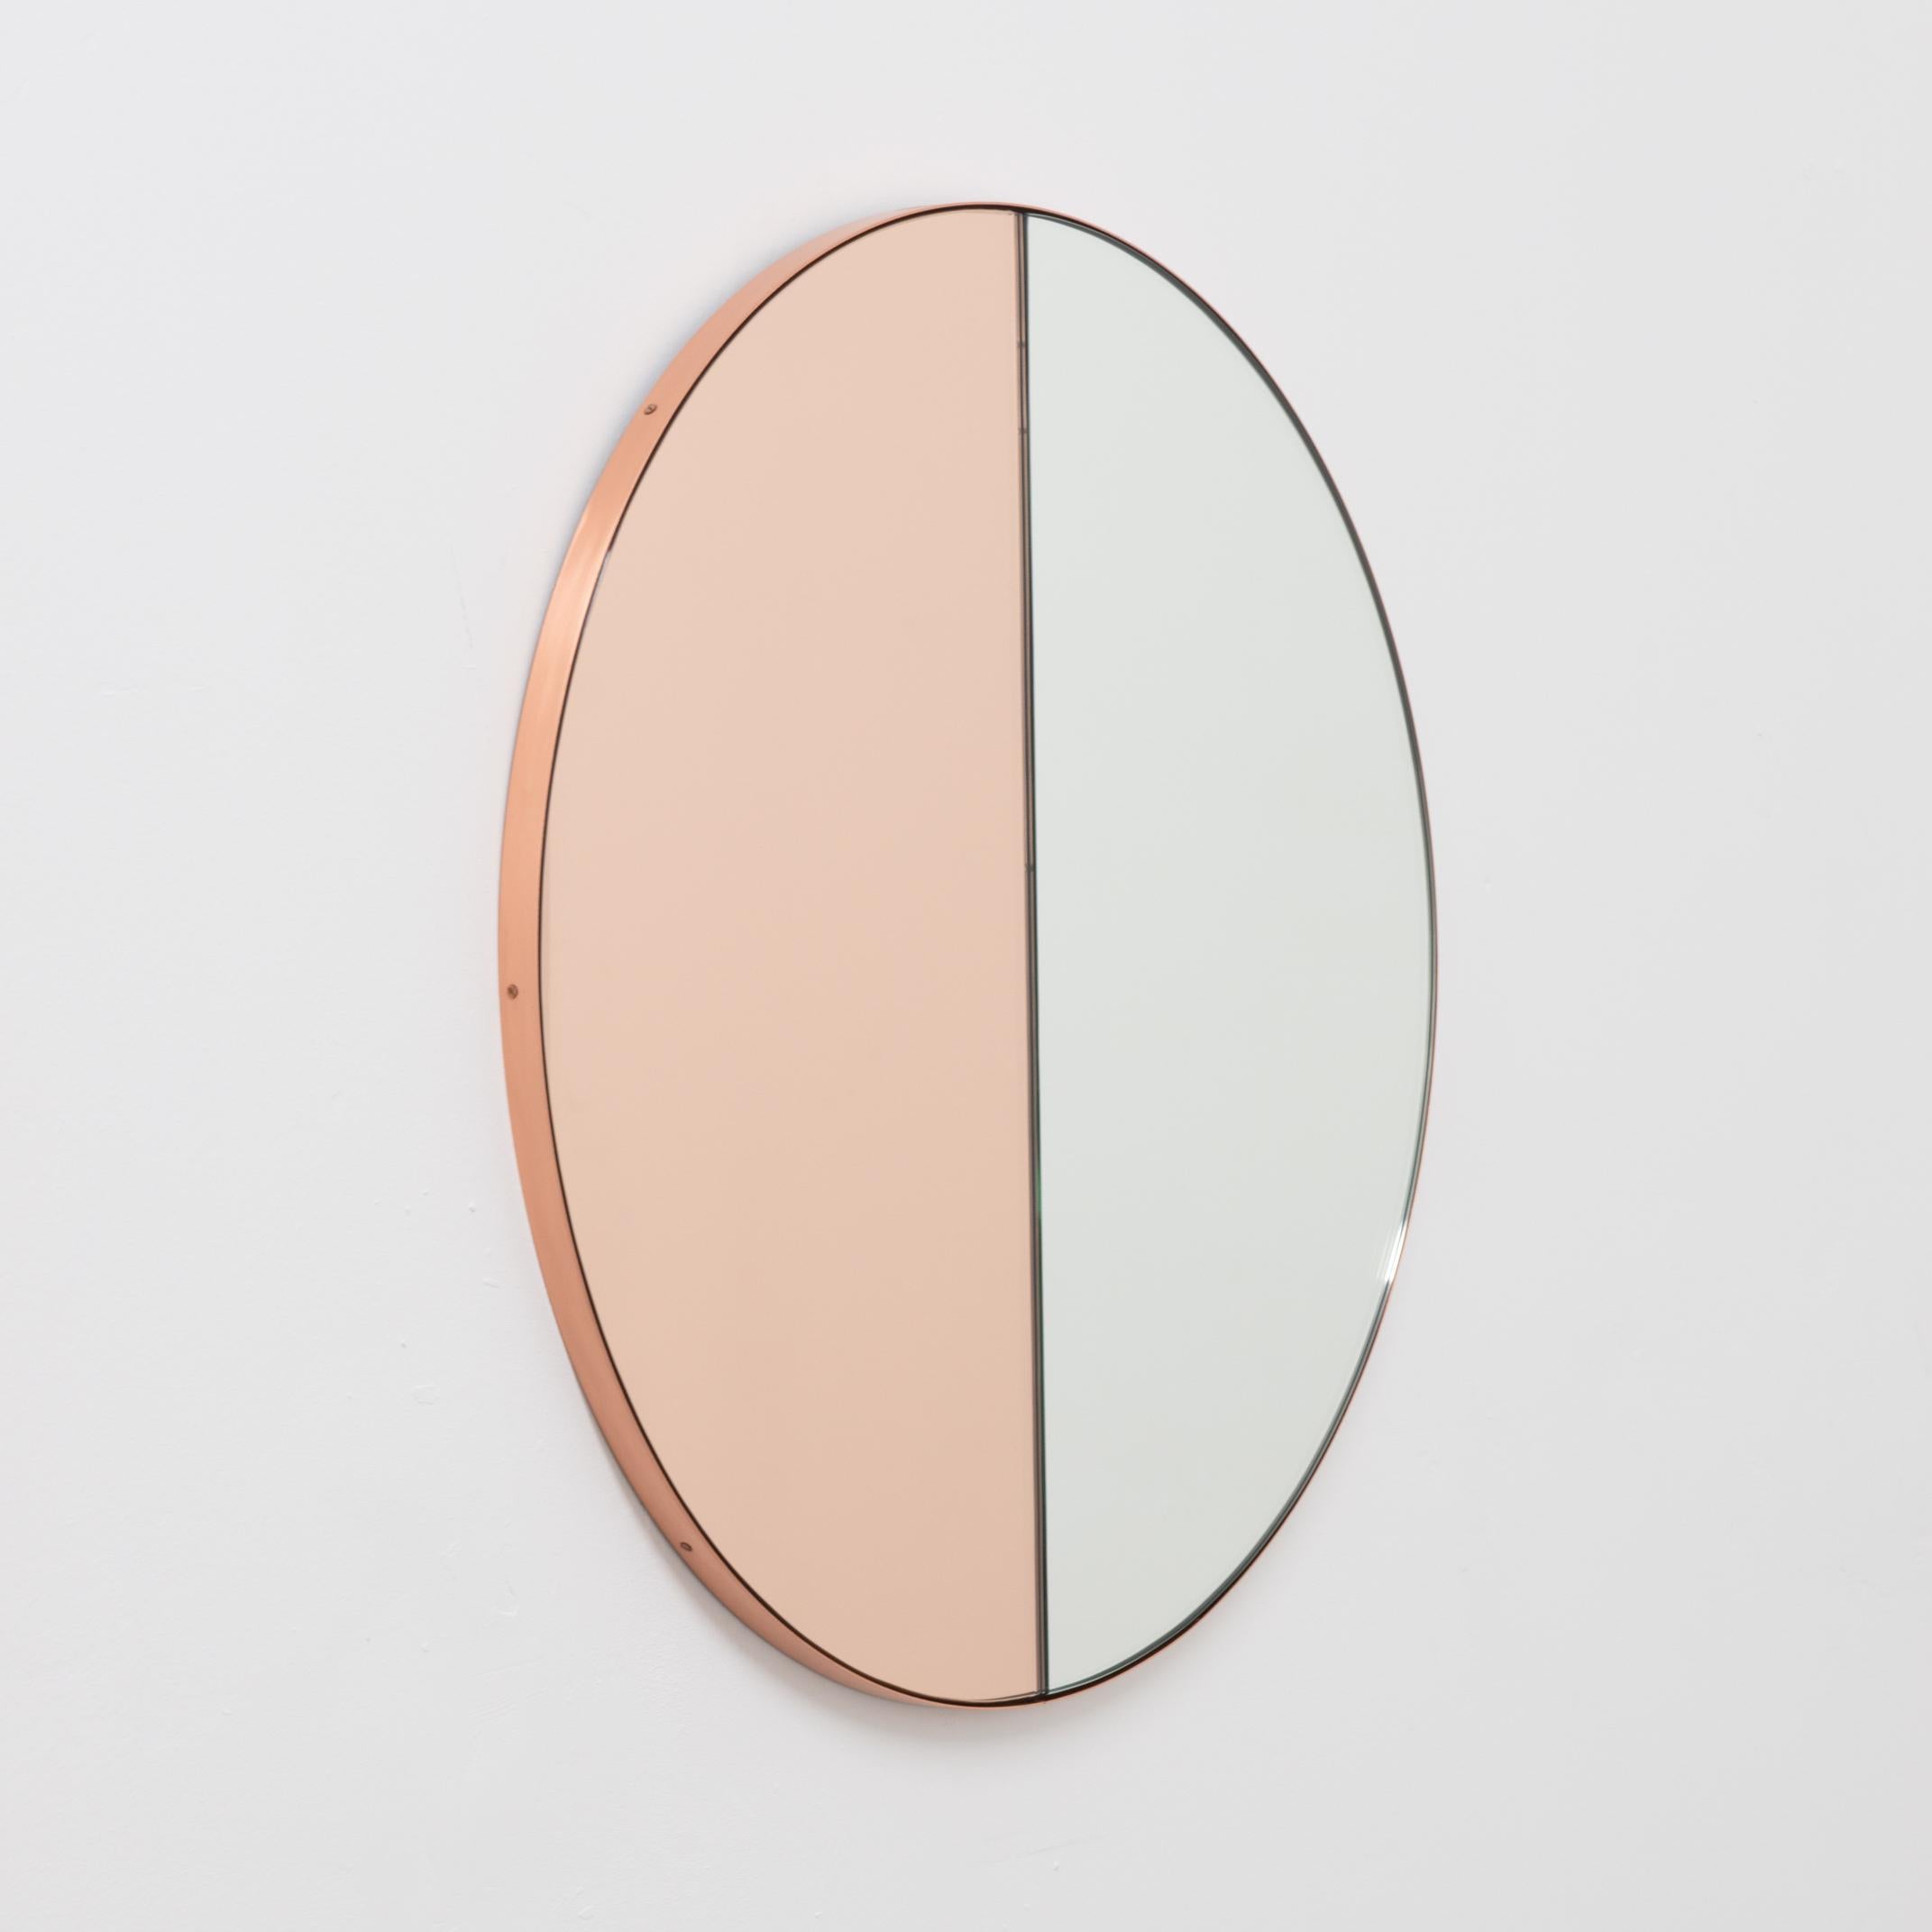 Contemporary mixed tinted (silver & rose gold / peach) Orbis Dualis mirror with a chic copper frame. Designed and handcrafted in London, UK.

All mirrors are fitted with an ingenious French cleat (split batten) system so they may hang flush with the